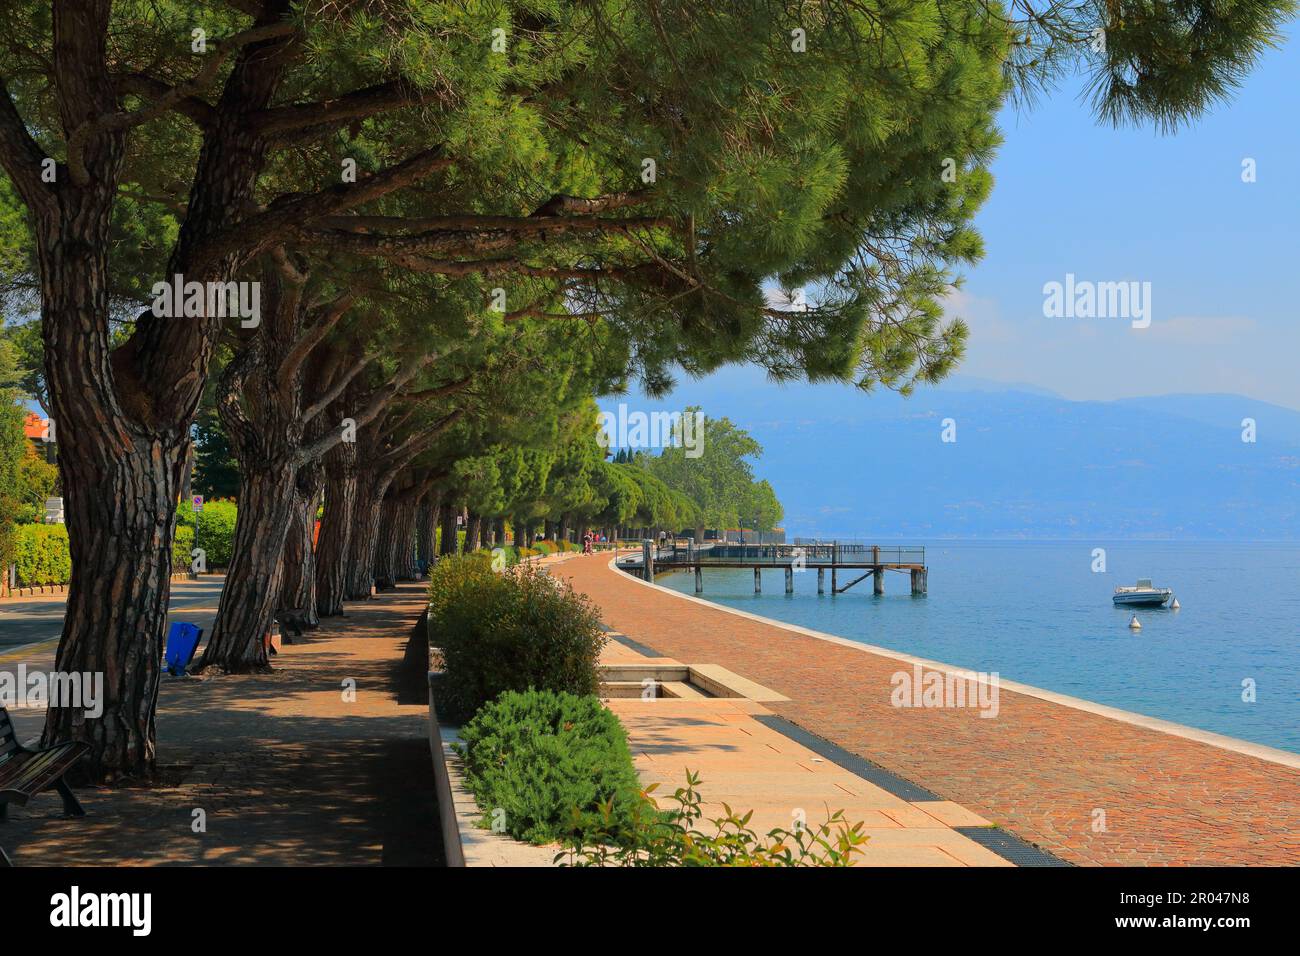 The picturesque embankment of the resort town of Maderno on Lake Garda in Italy. Stock Photo